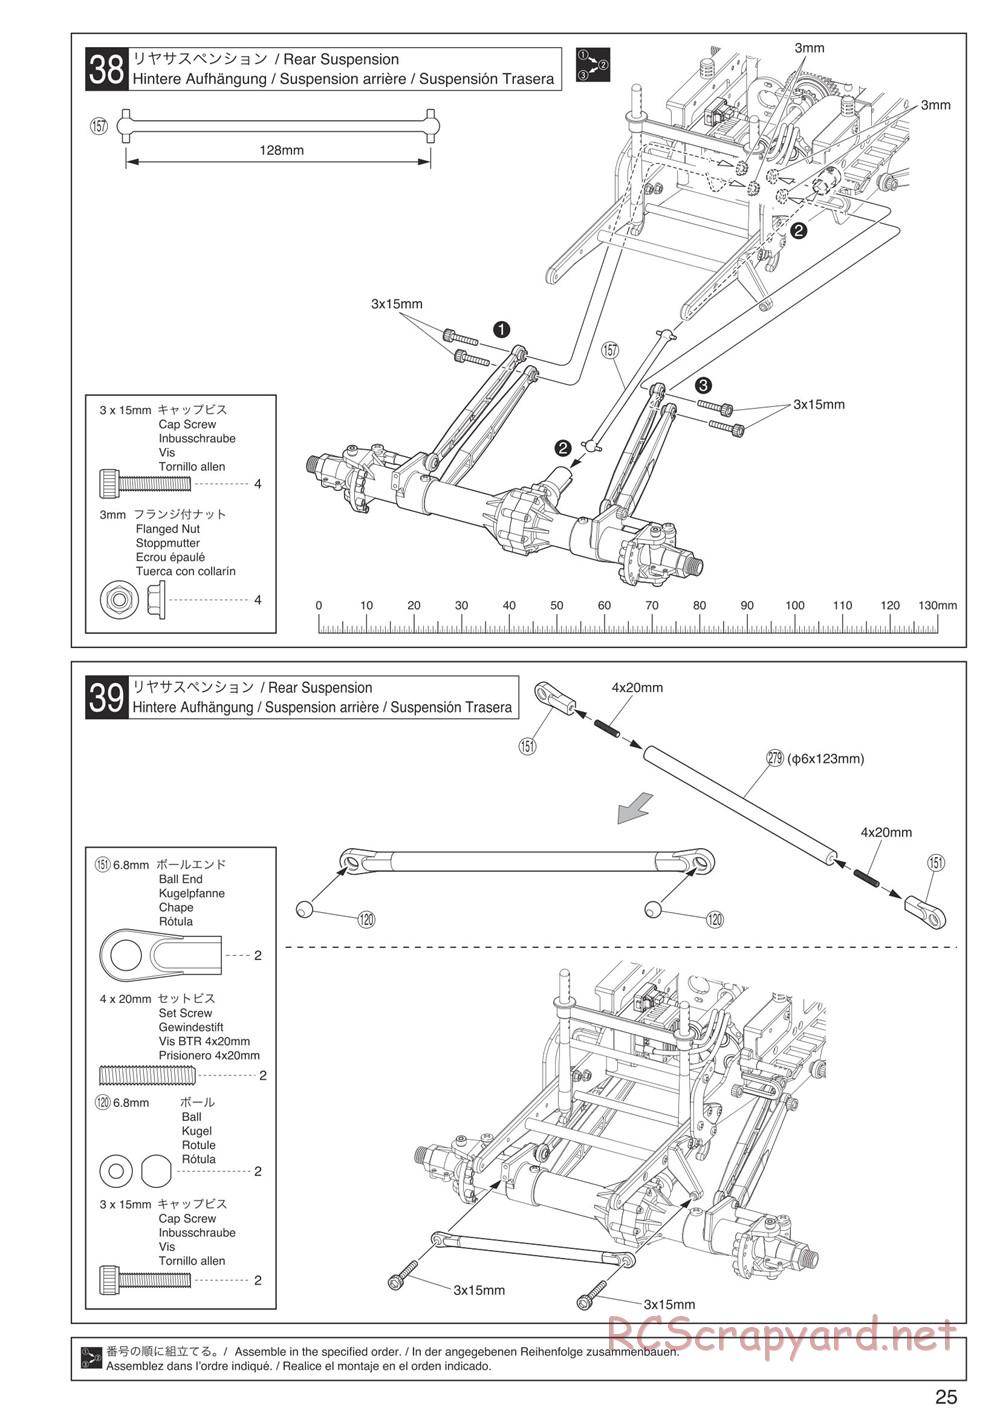 Kyosho - FO-XX VE 2.0 - Manual - Page 25